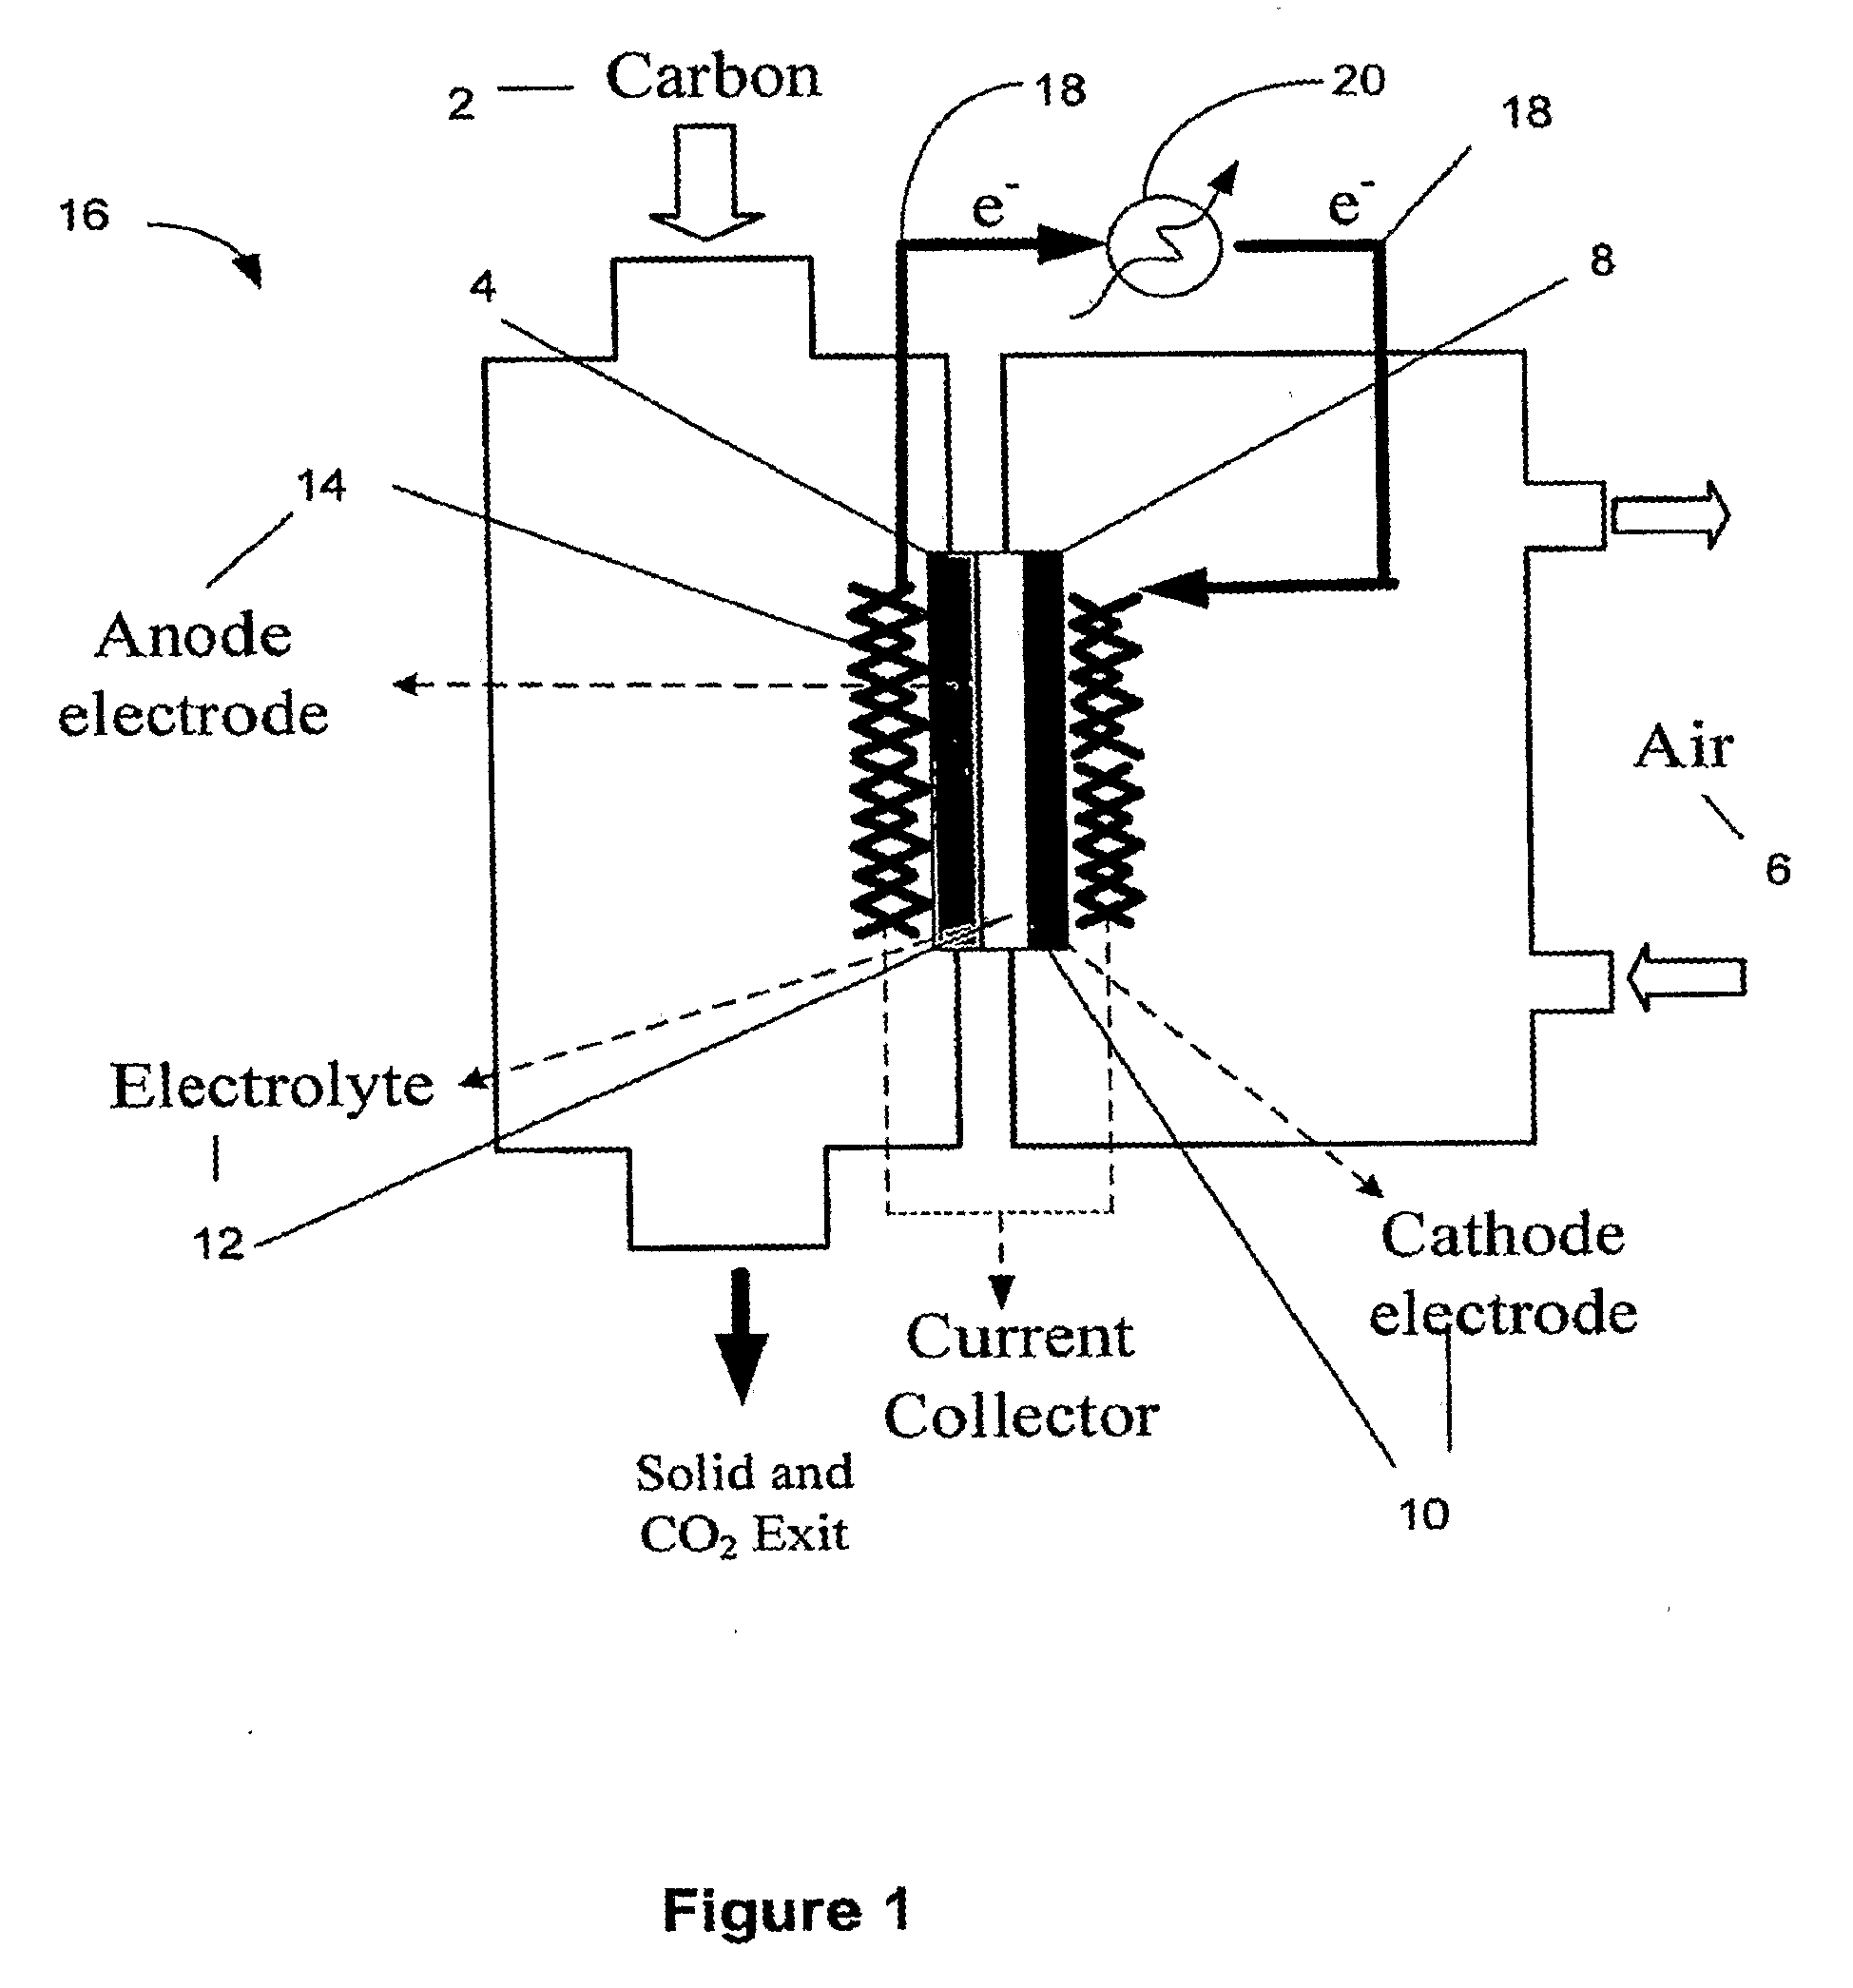 Catalysts compositions for use in fuel cells